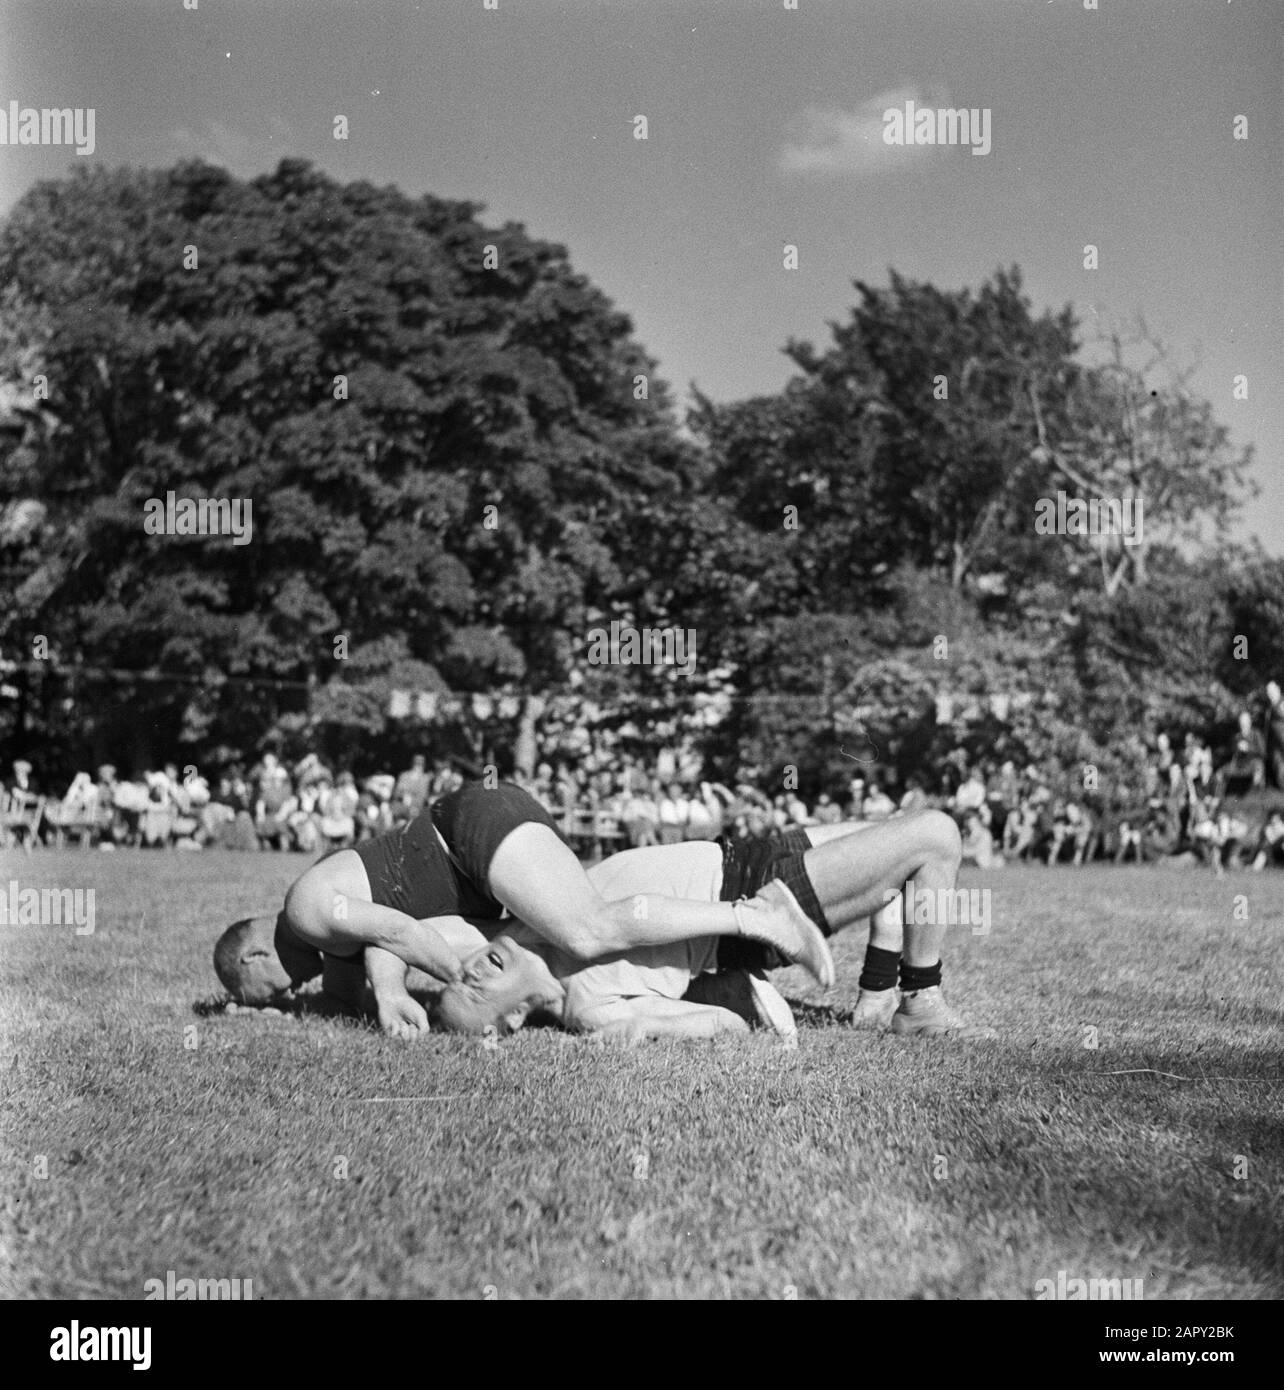 Scotland - The Highlands  Wrestling during the Highland Games, a nineteenth century continuation of traditional clan games from the Highlands of Scotland Date: 1934 Location: Great Britain, Scotland Keywords: folk culture Stock Photo